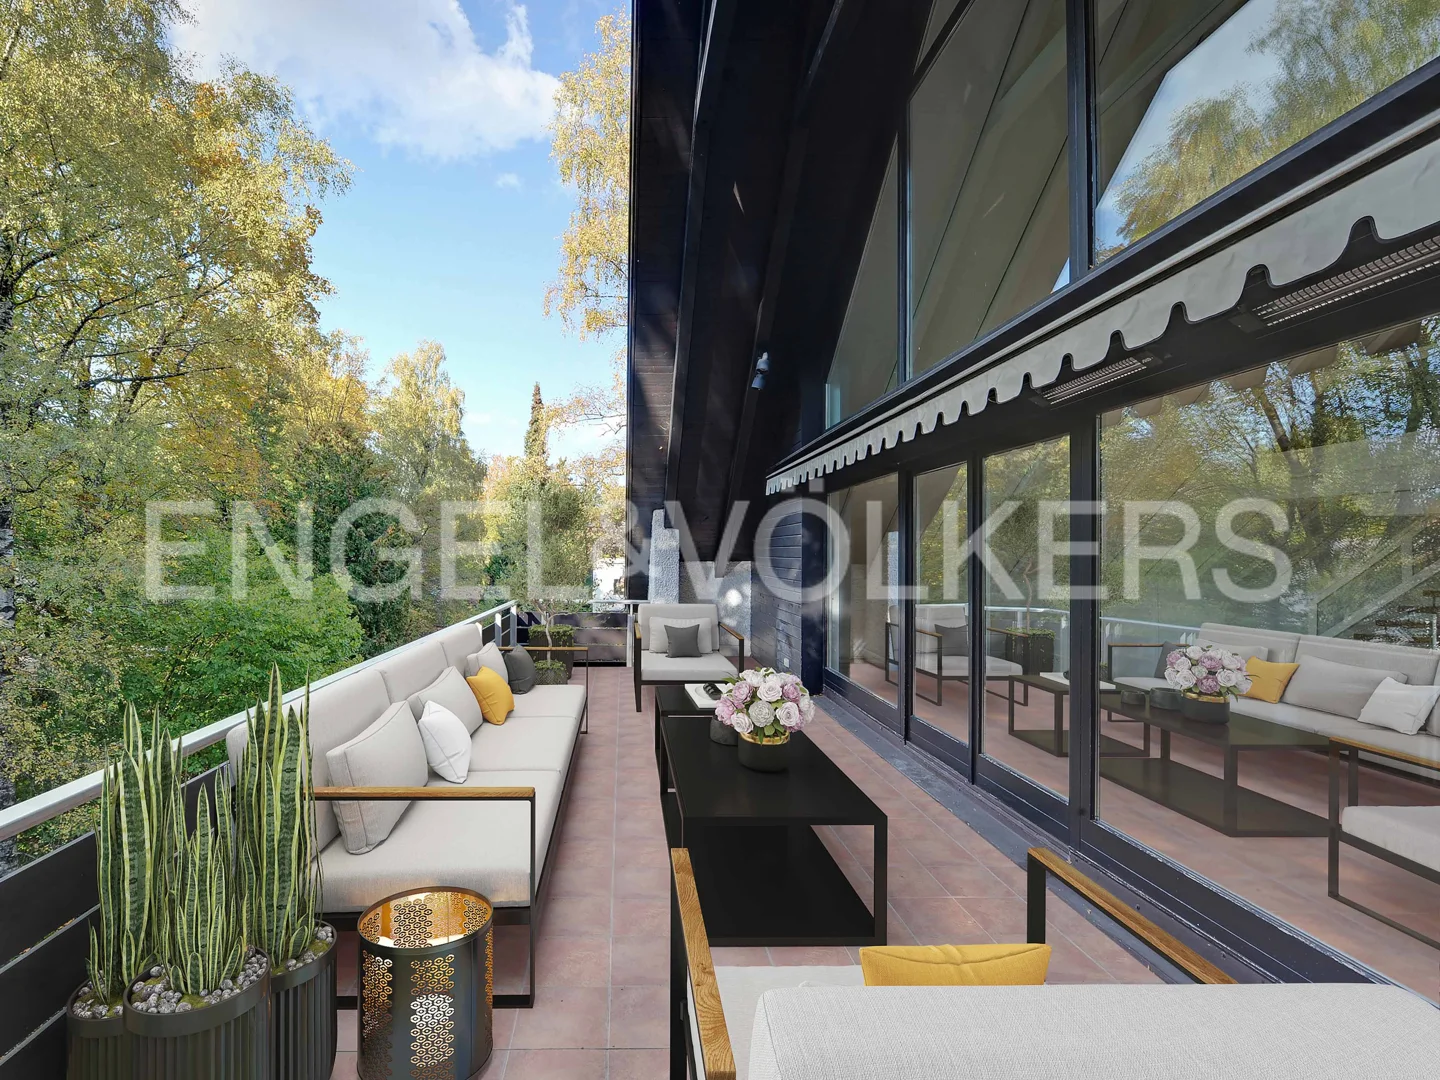 Loft-style roof terrace apartment with dream balcony in the Menterschwaige